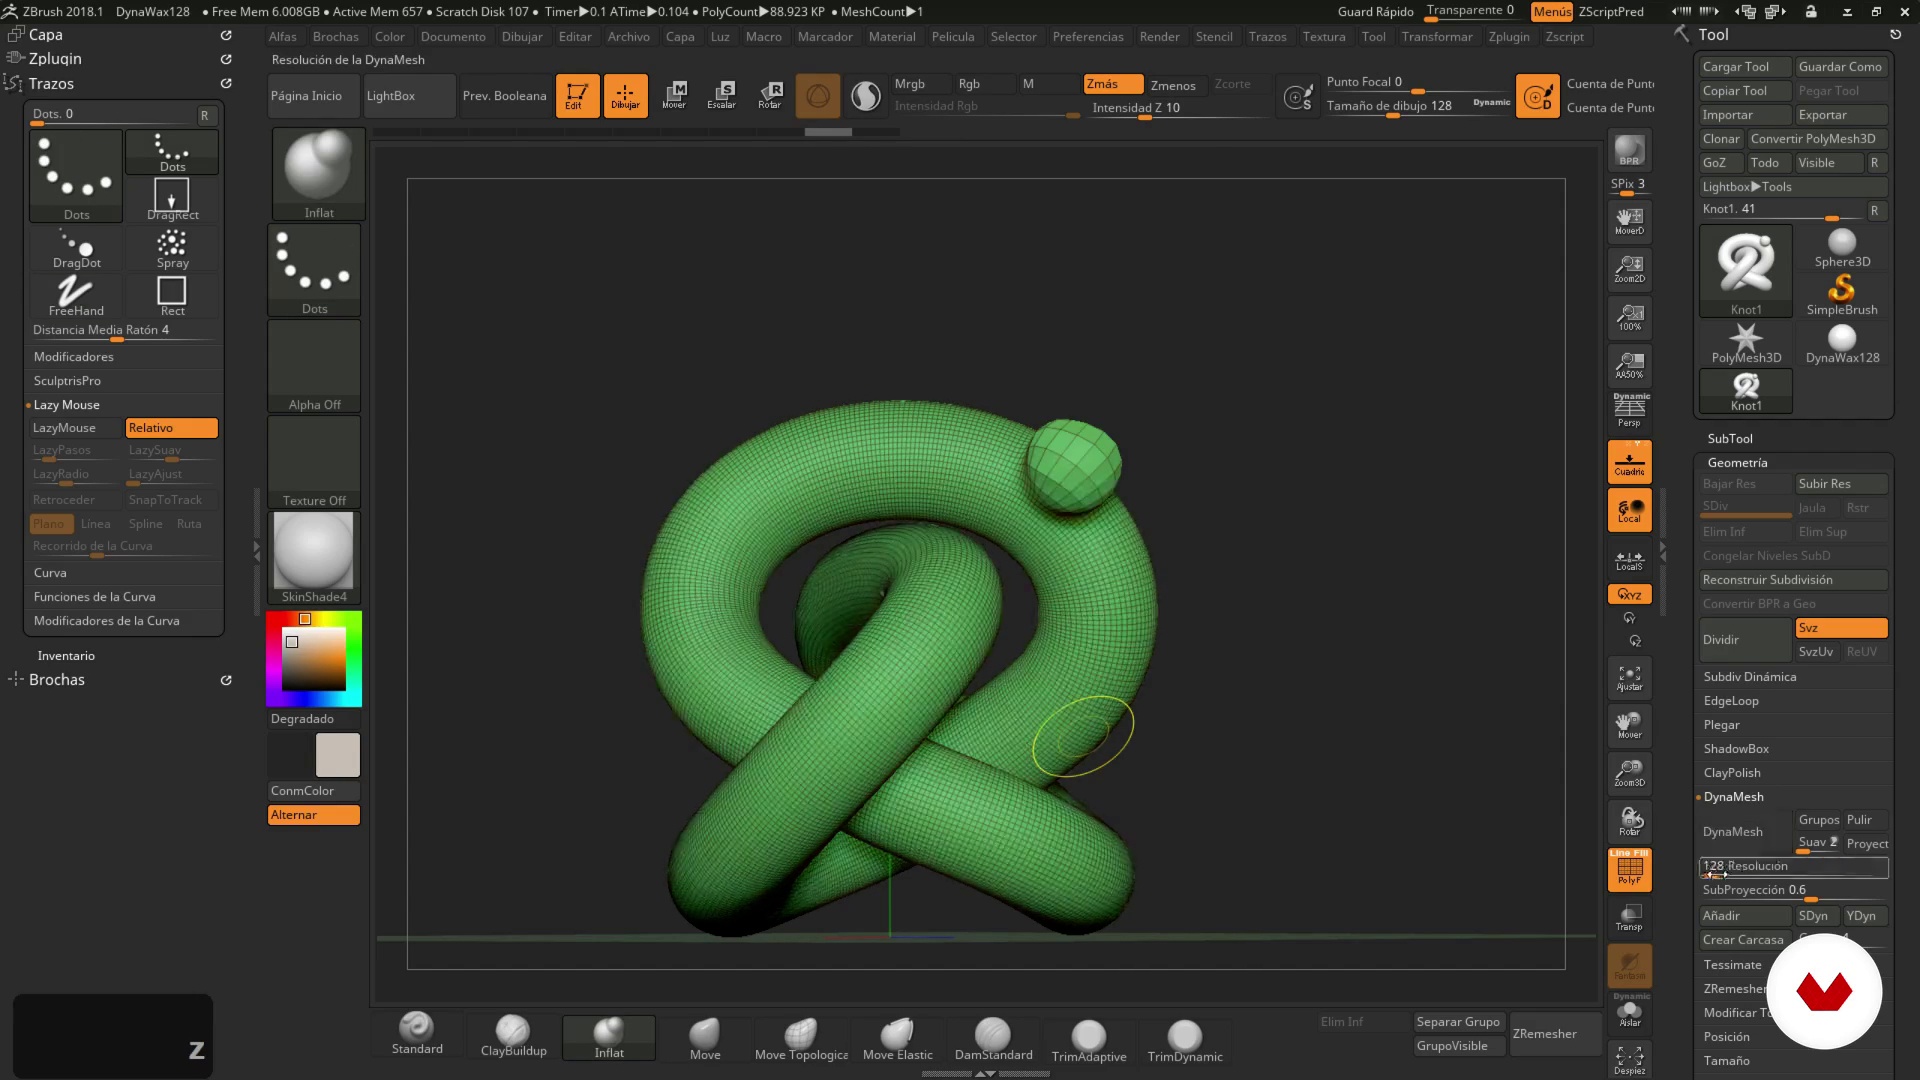 zbrush and cinema 4d integration